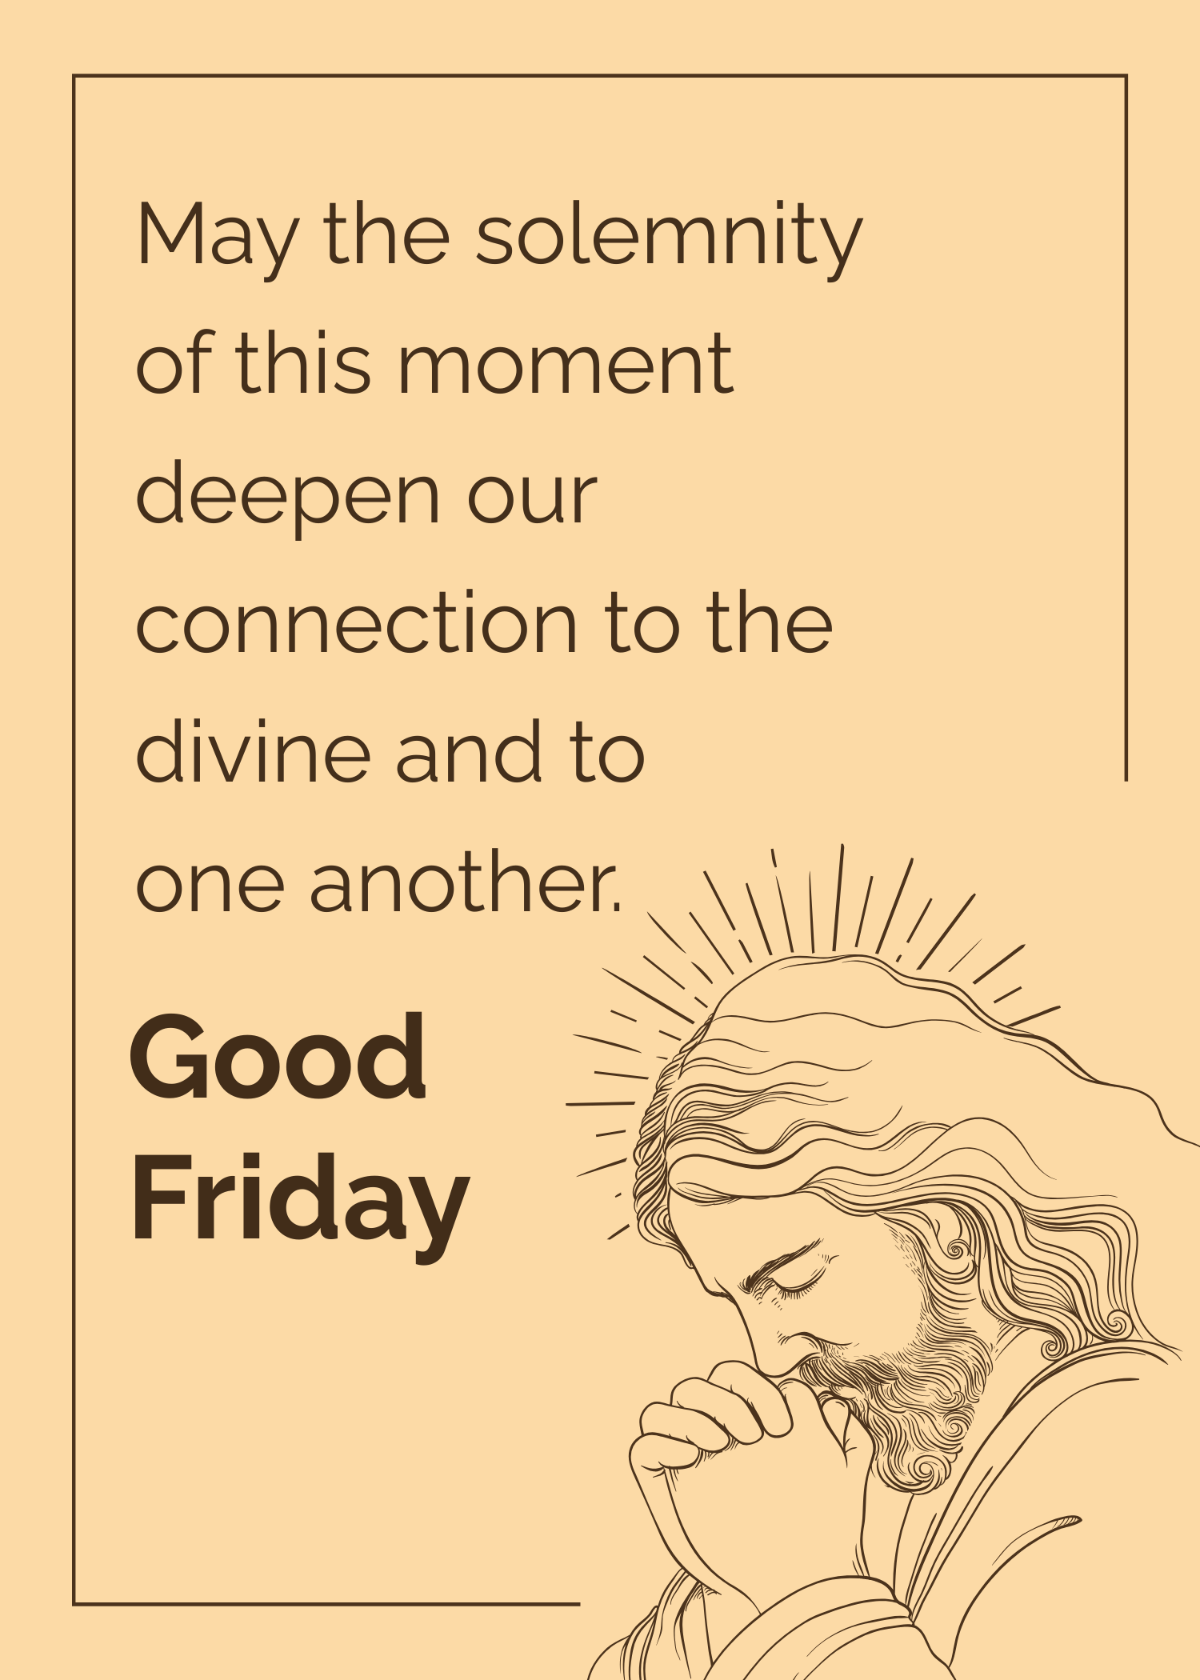 Good Friday Greeting Template